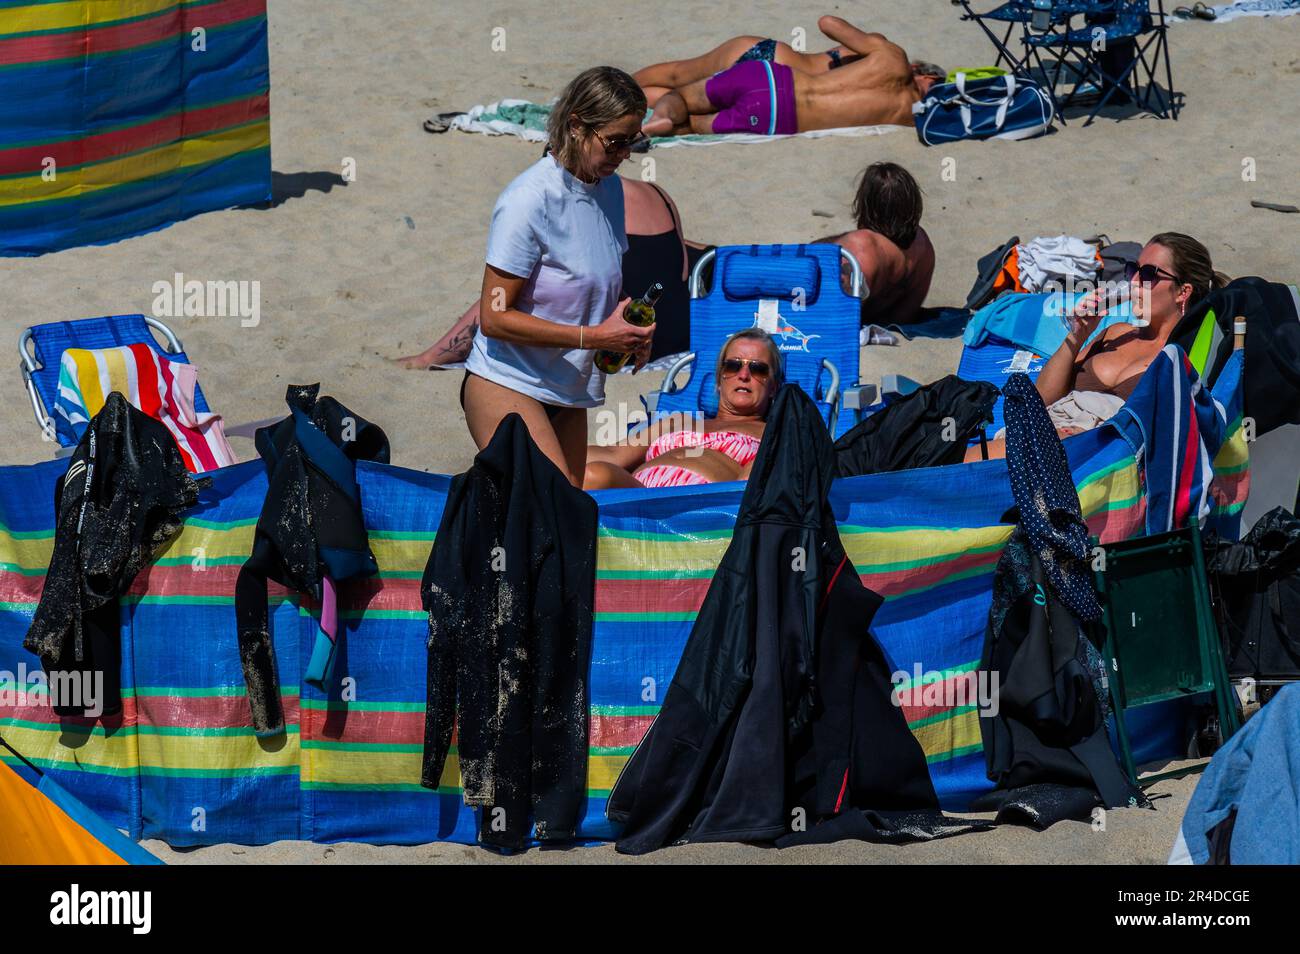 St Ives, UK. 27th May, 2023. Wetsuits hang out to dry on a windbreak - People flock to the beach to sunbathe as well as take part in watersports and boat trips - Sunny weather for the bank holiday weekend in St Ives. Credit: Guy Bell/Alamy Live News Stock Photo